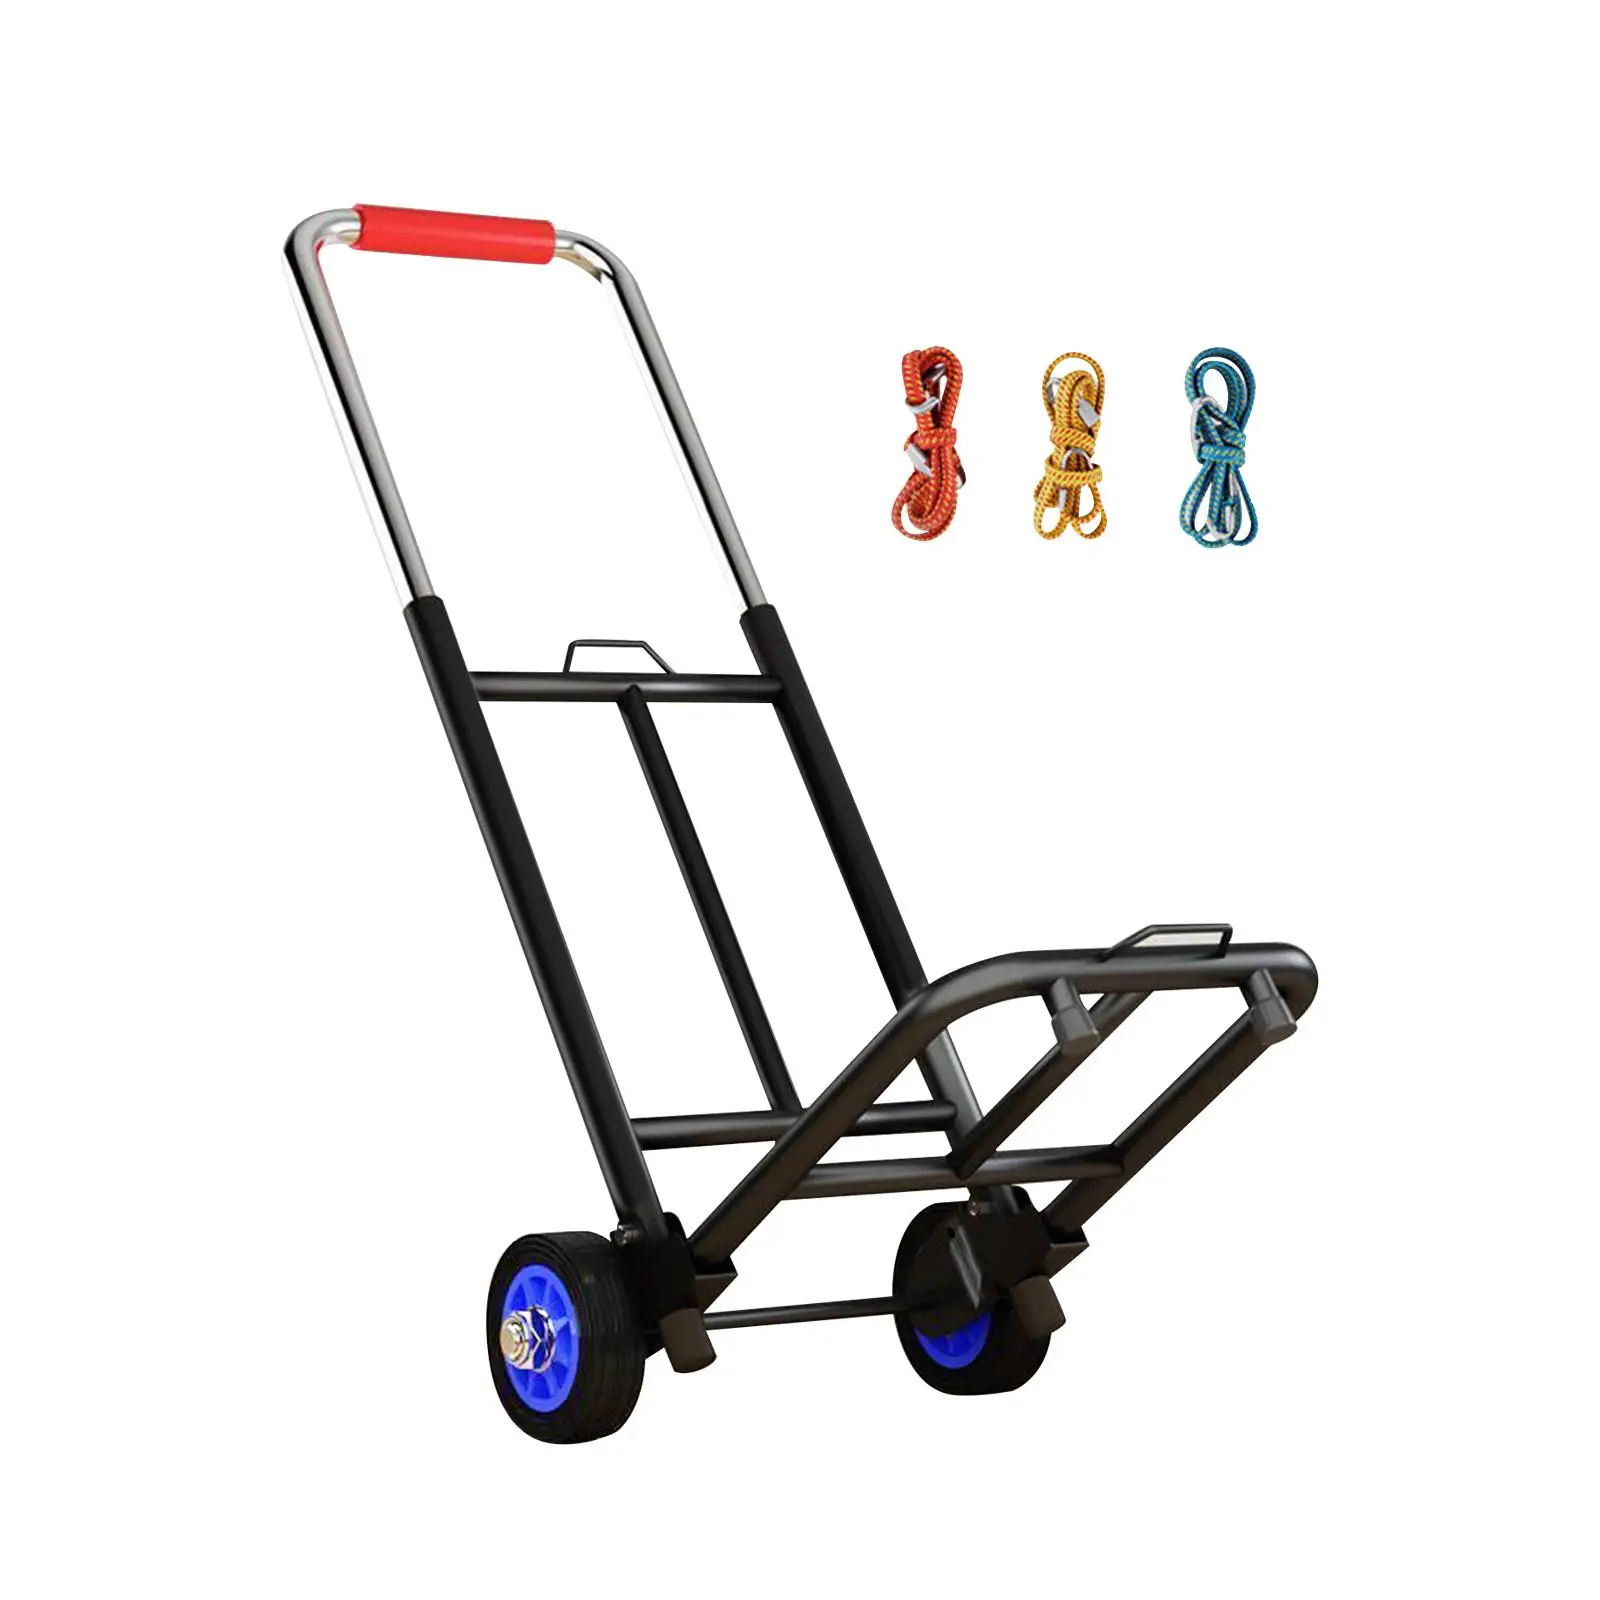 Folding Hand Truck Adjustable Folding Hand Cart Heavy Duty Luggage Cart for Office Moving Shopping Travel Transportation